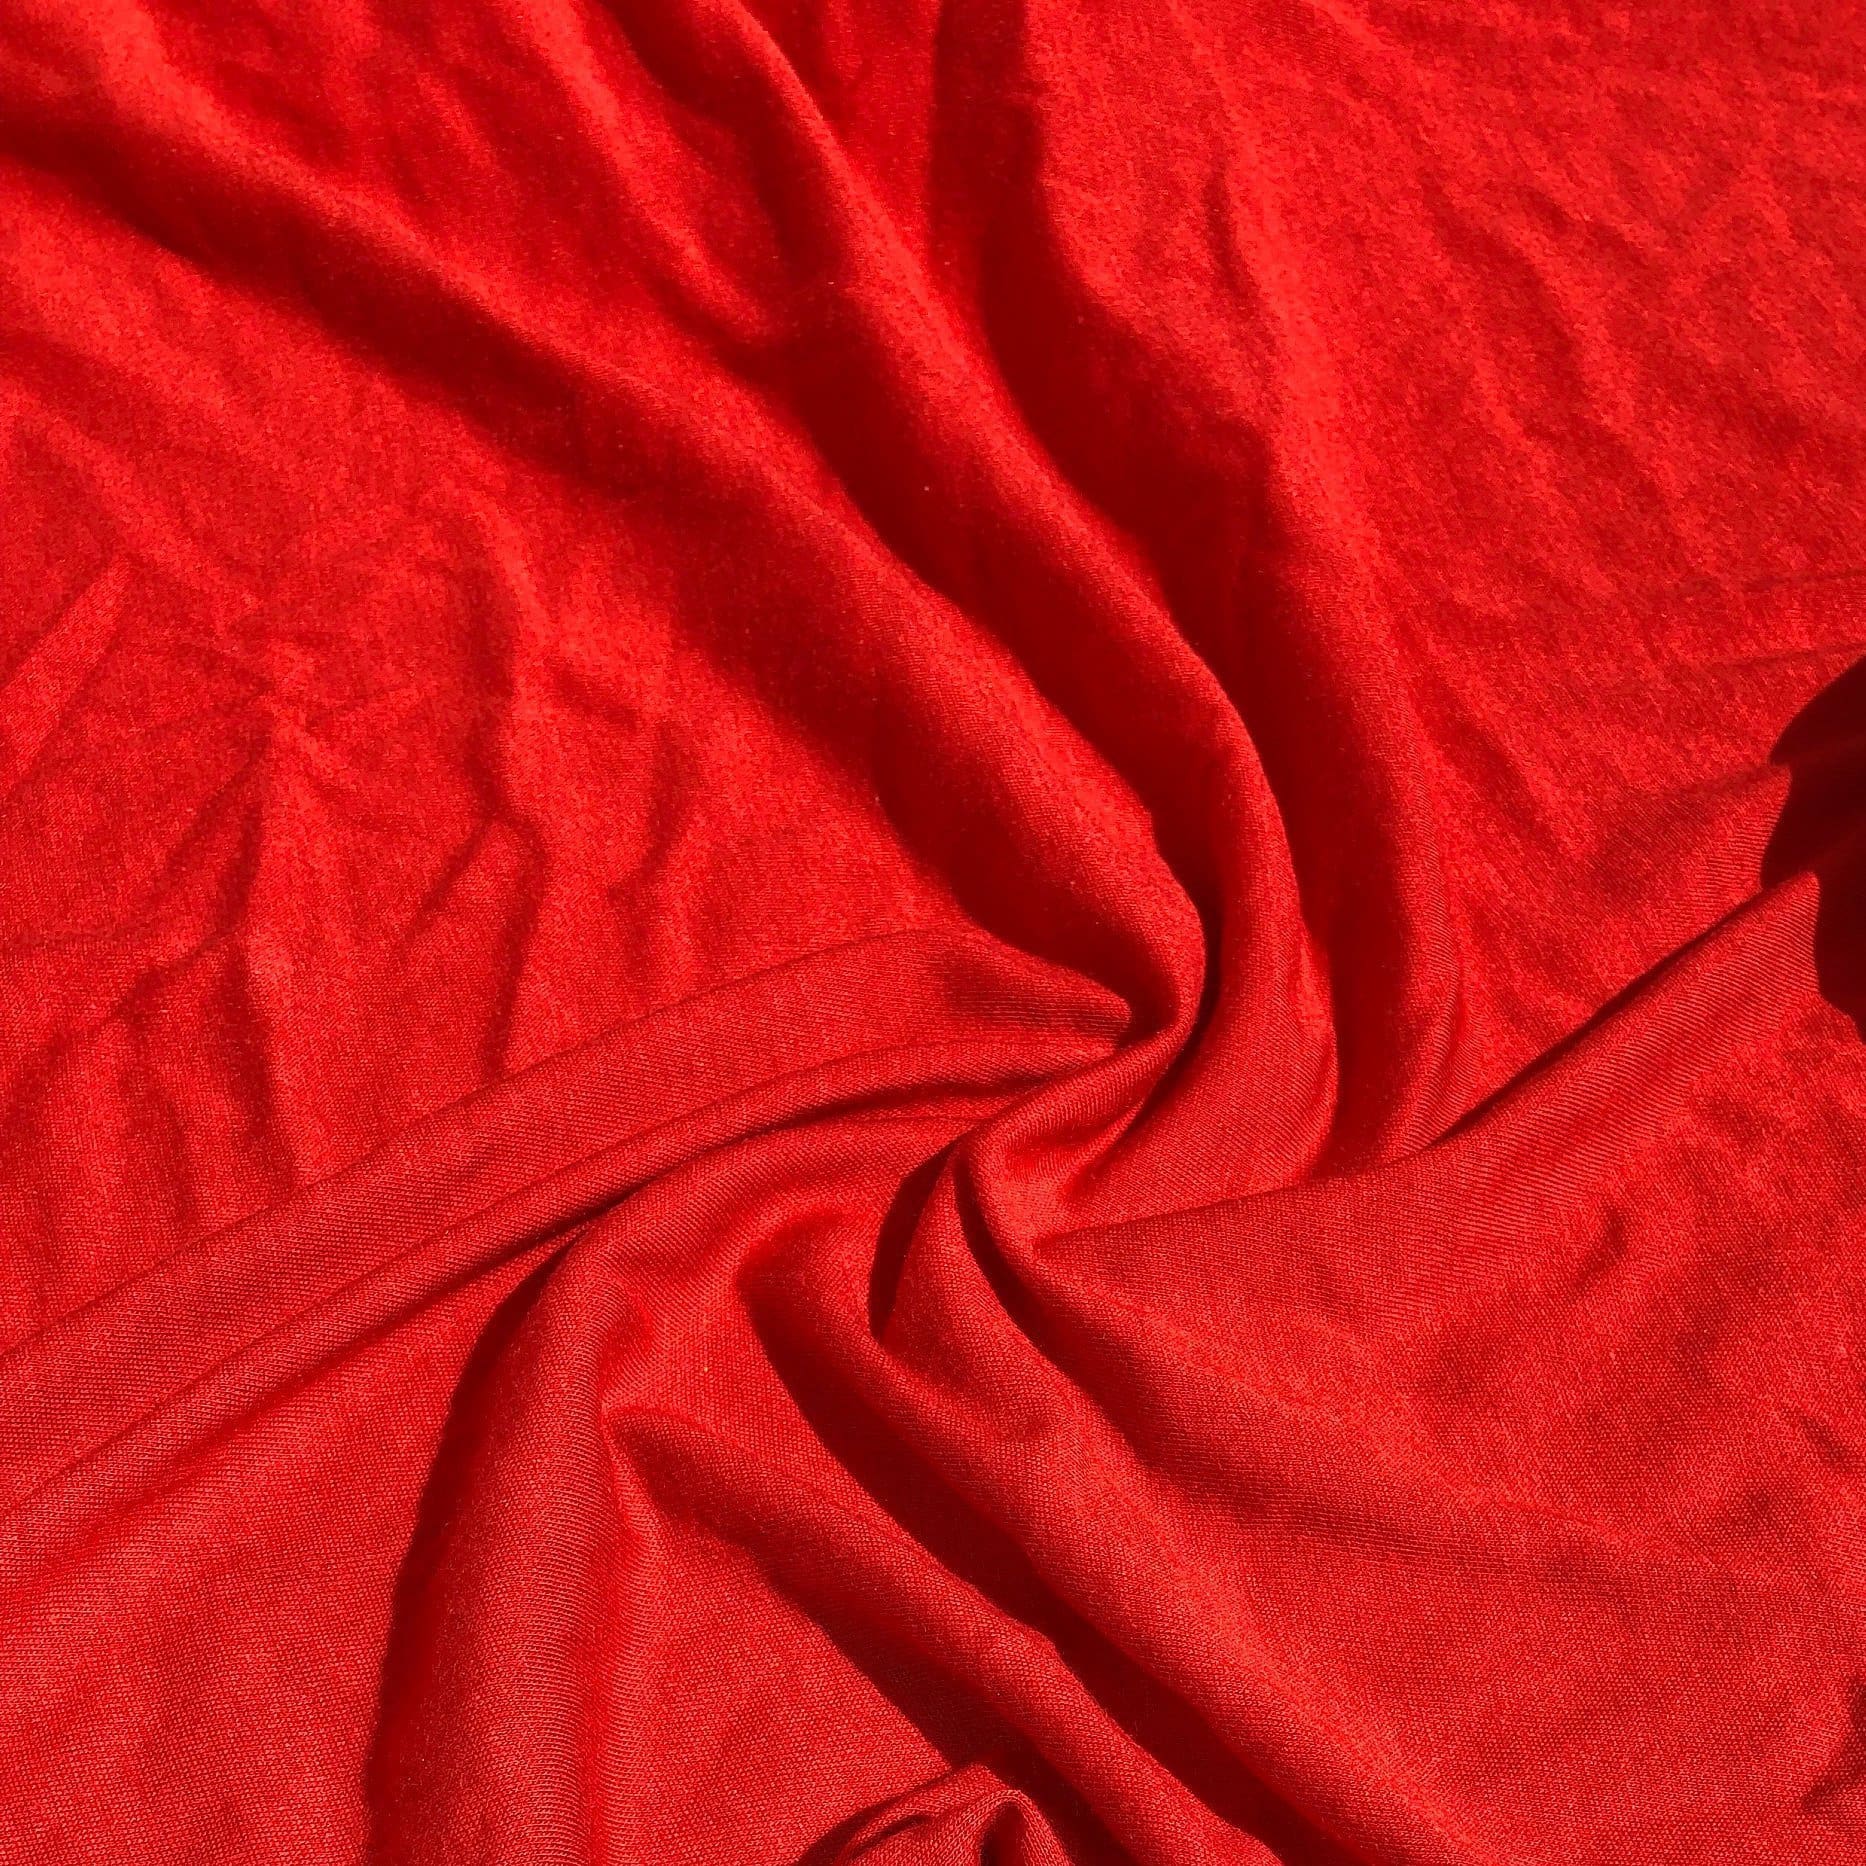 Red Viscose (rayon) Fabric Stock Photo, Picture and Royalty Free Image.  Image 117091980.